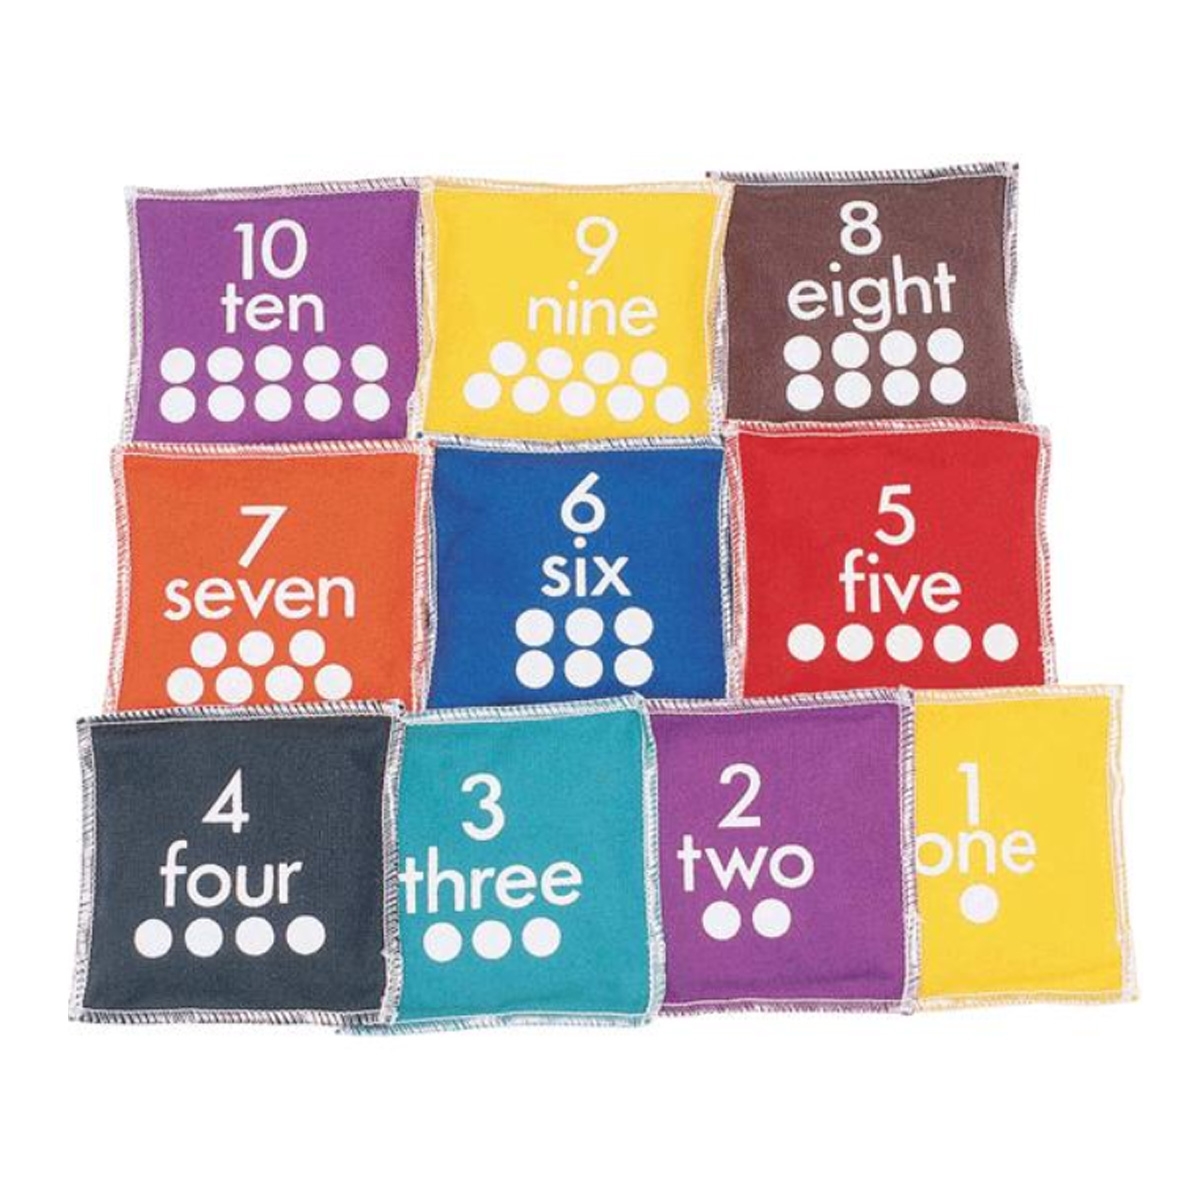 set of 10 bean bags with numbers on them